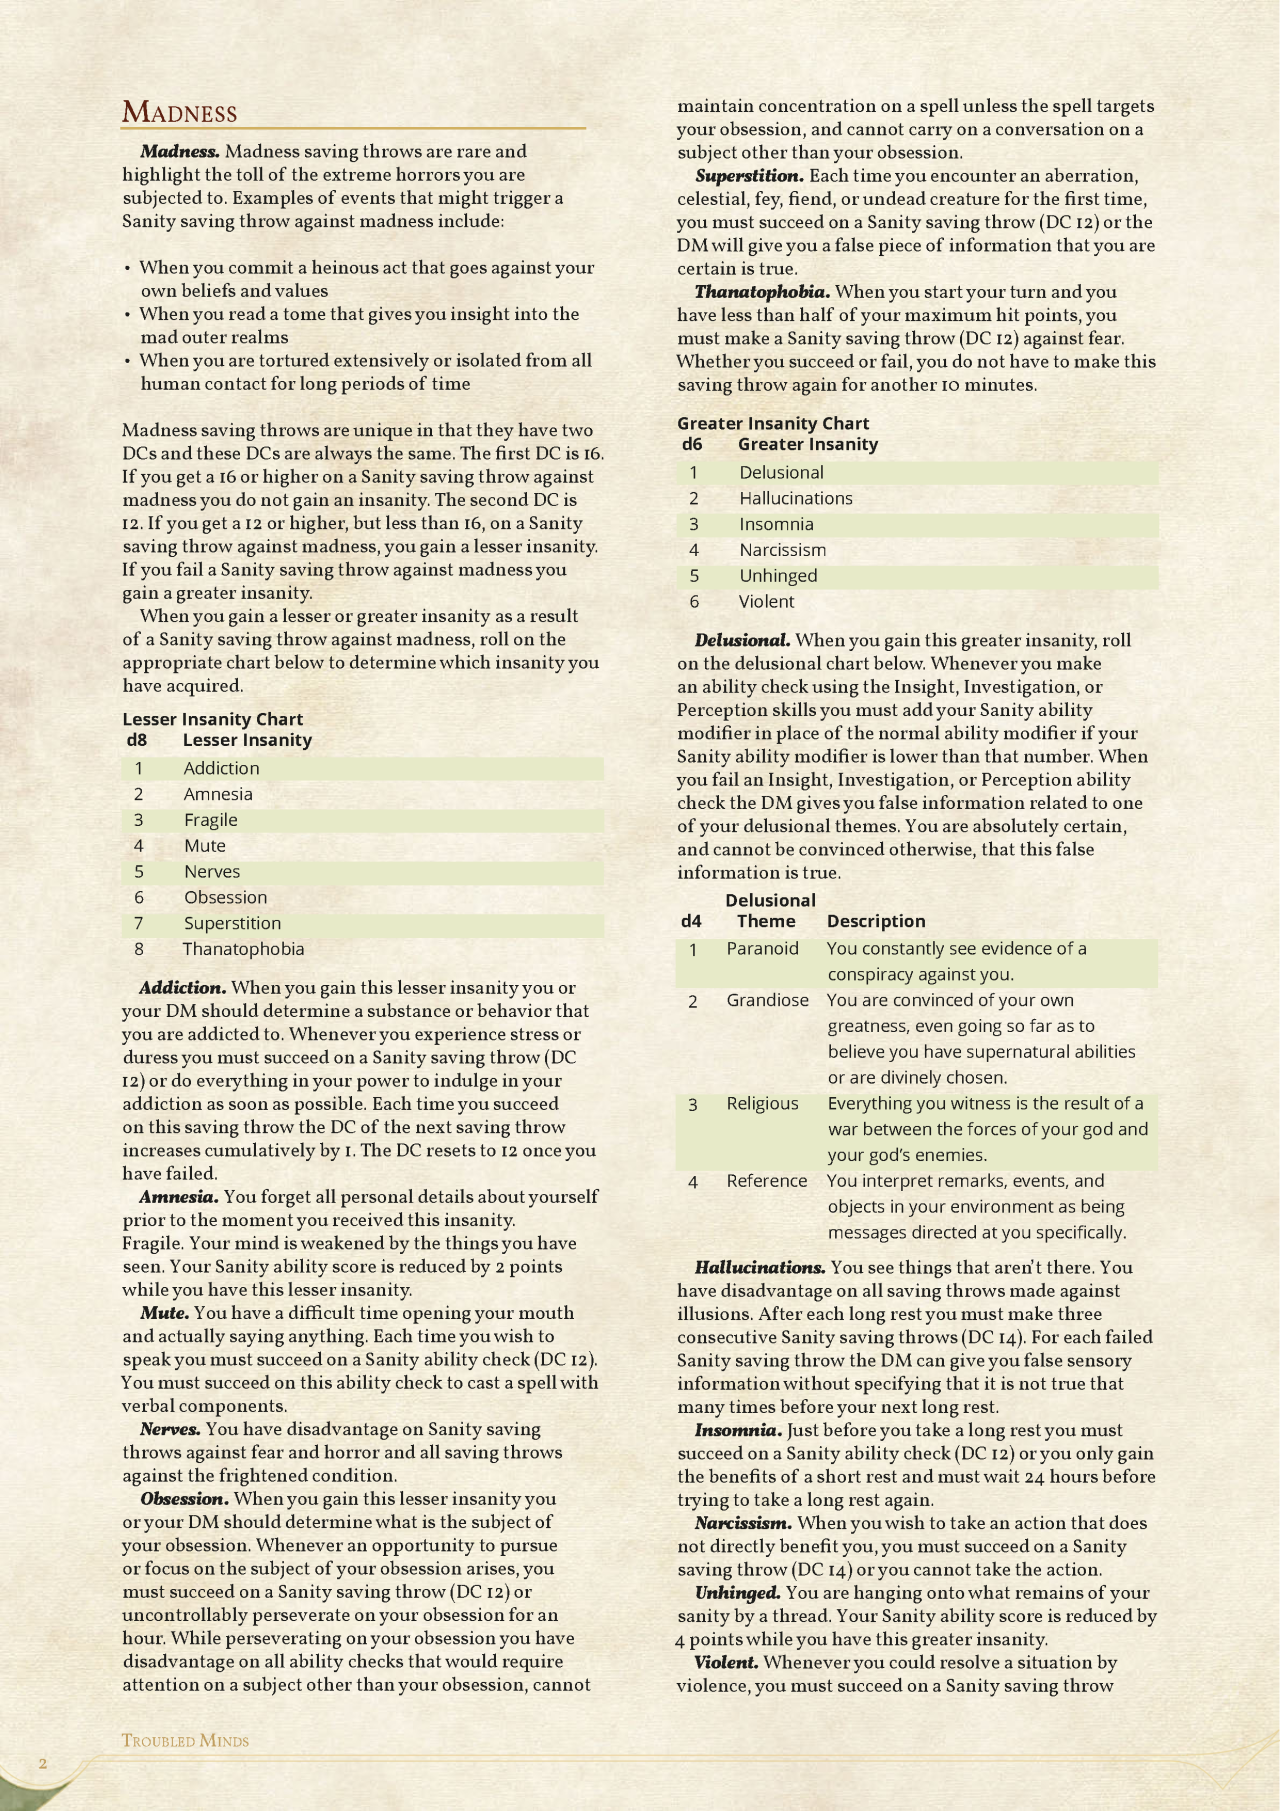 dnd-5e-homebrew-fear-horror-and-madness-rules-by-coolgamertagbro